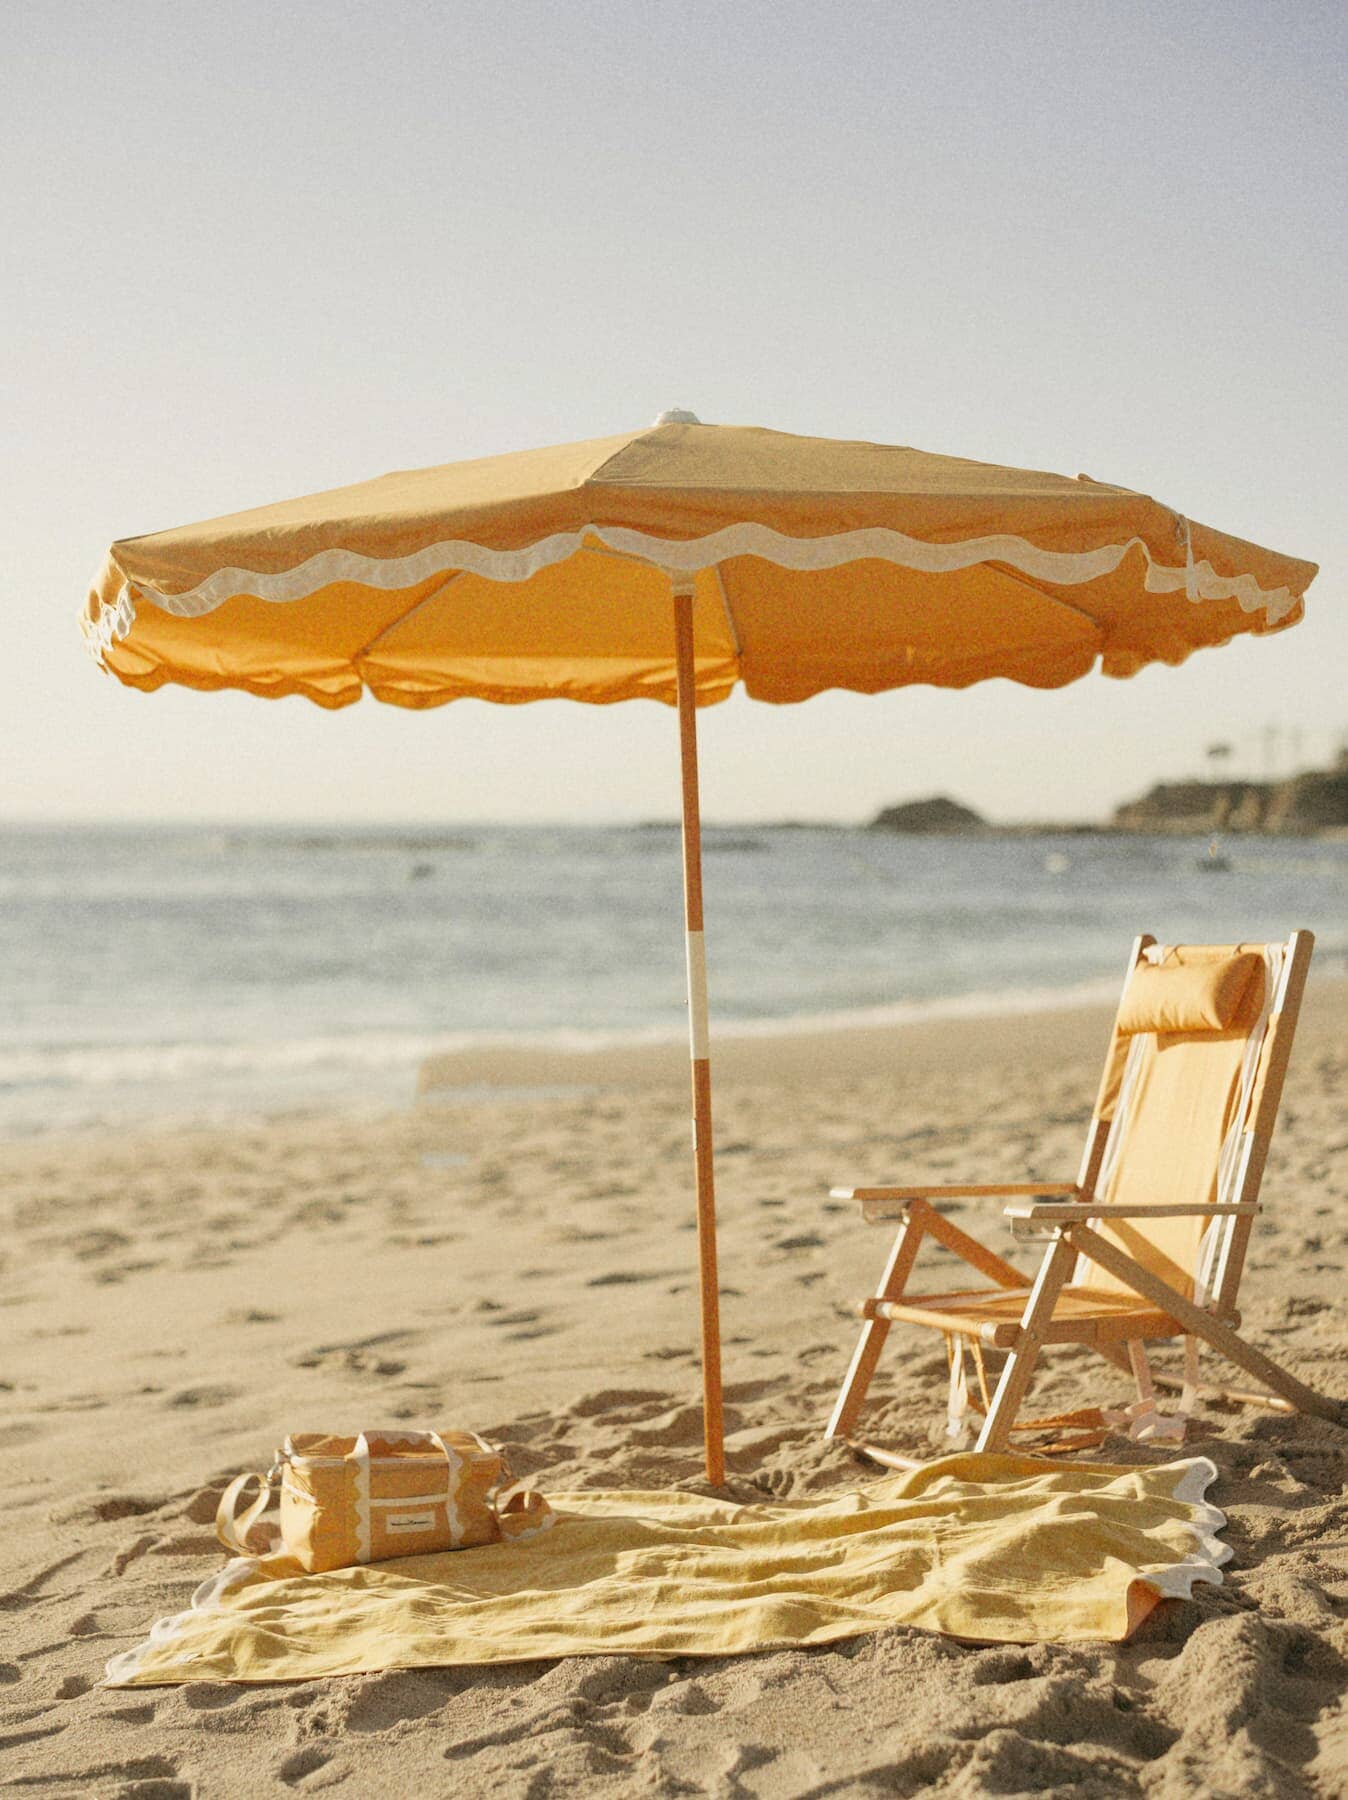 riviera mimosa beach set up with amalfi umbrella, tommy chair and accessories